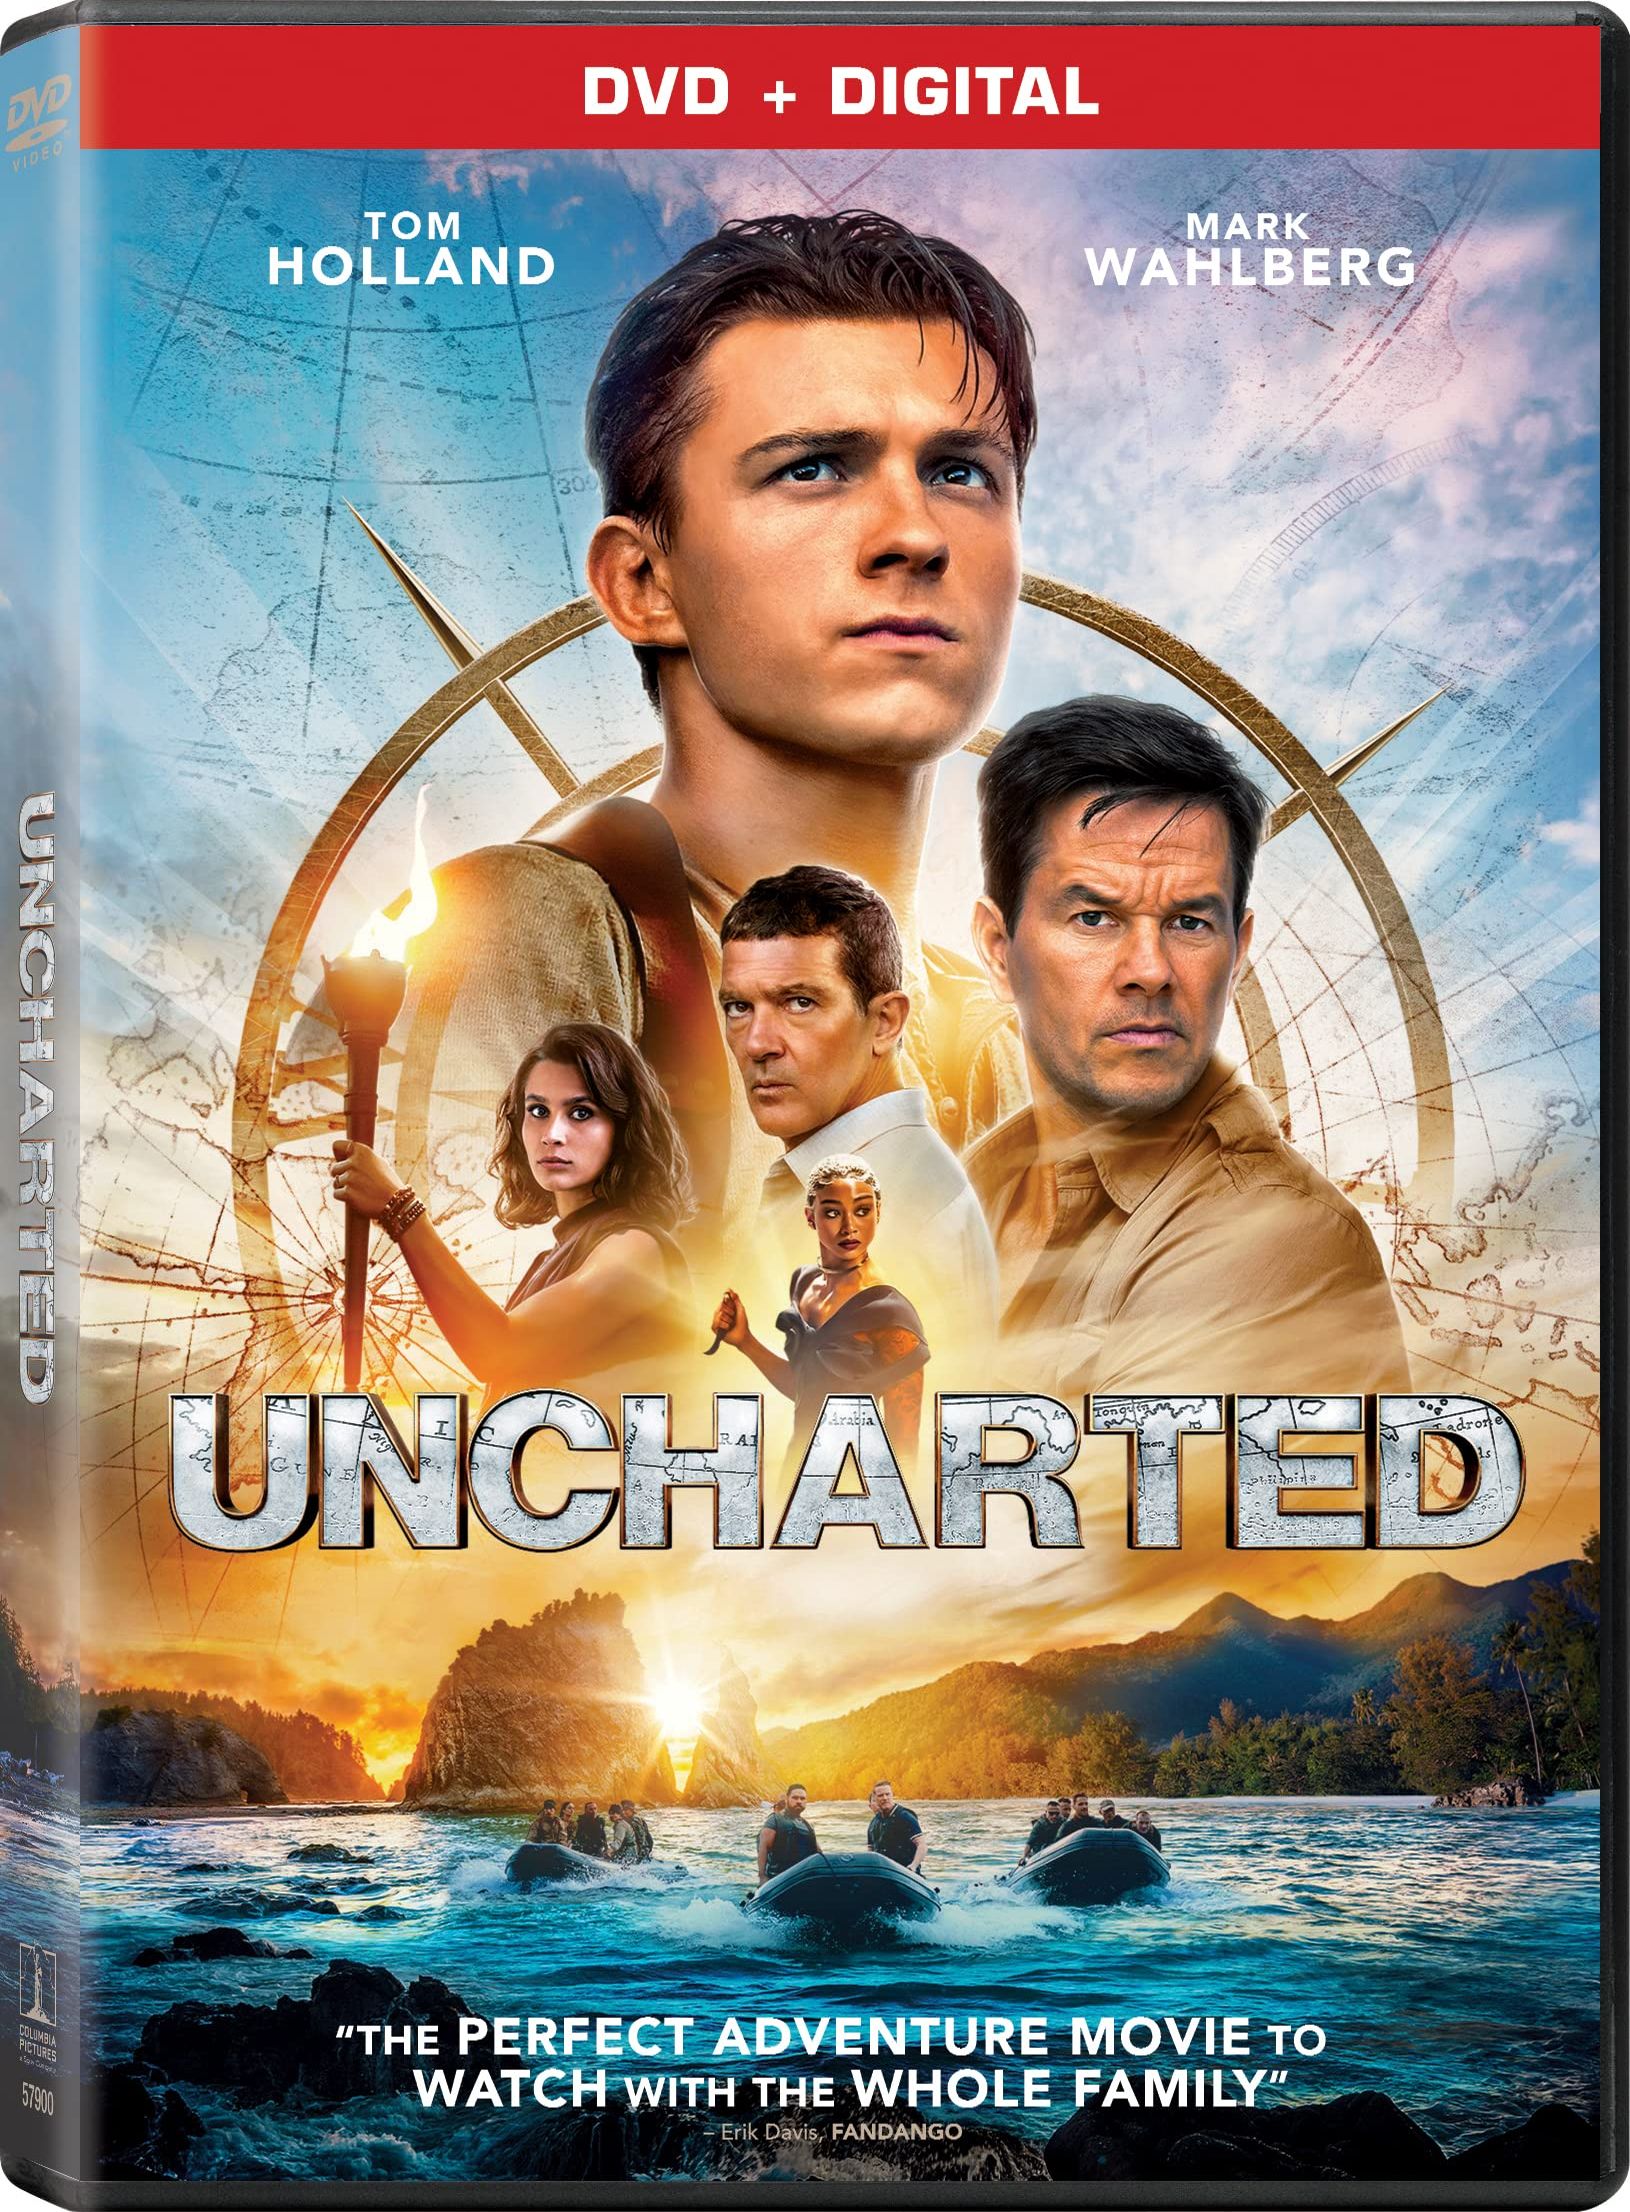 Uncharted DVD Release Date May 10, 2022